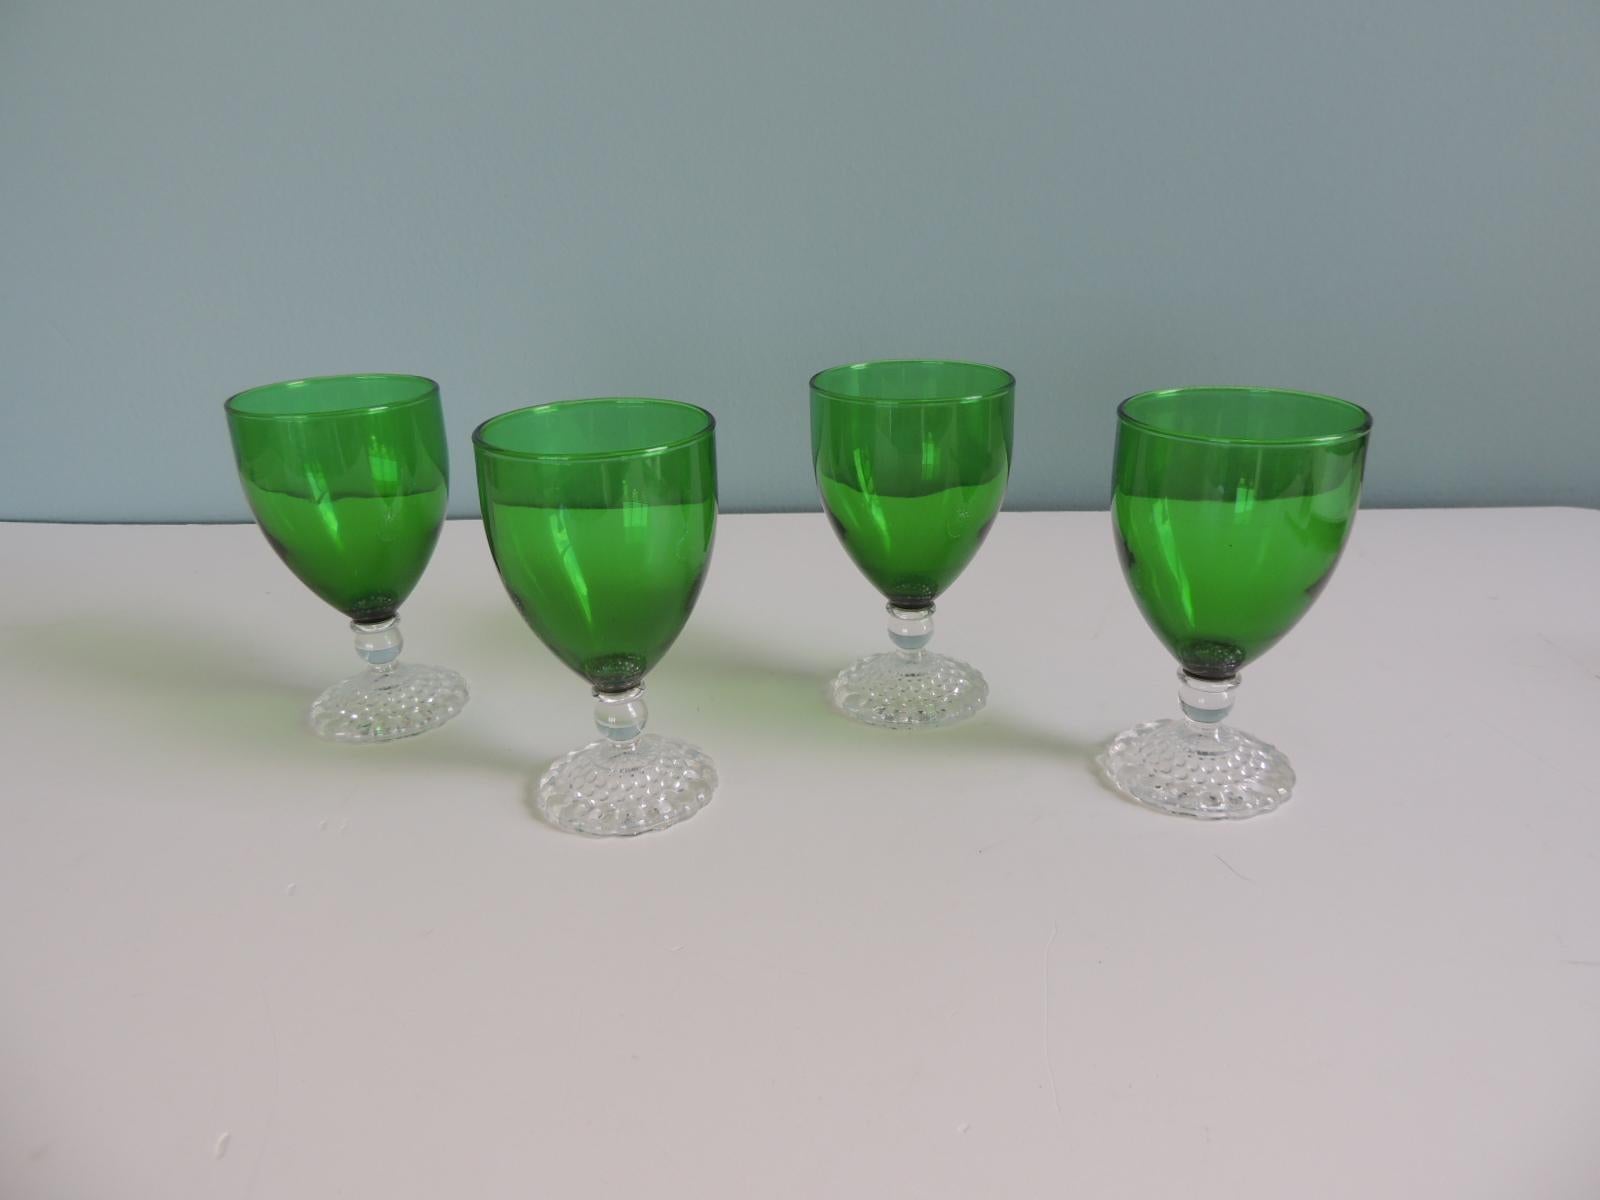 Set of (4) Emerald Green Depression Glasses
with white beaded foot.
Size: 2.5